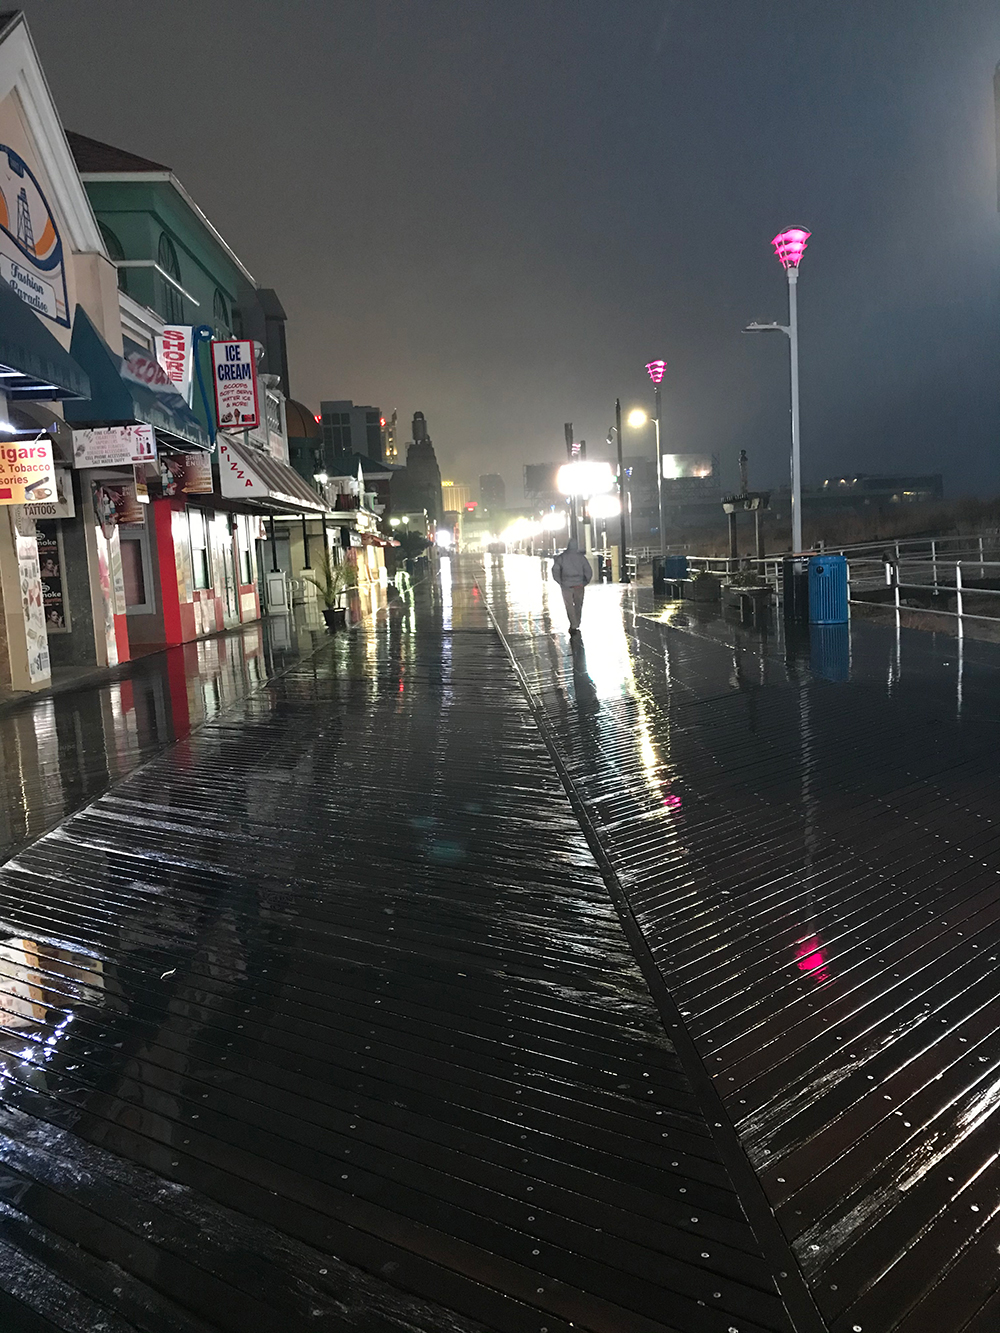 David Weisbrod was awarded First Place for Photography by a Non-Professional artist. Titled “Night Owl,” his photograph shows a nearly deserted boardwalk on a dark, rainy night. The boardwalk is almost devoid of people, except one man walking away from us, his profile made sharp by street lights just beyond him that cast a bright reflective glare on the wet boardwalk. Even if shadows in the distance are people, the lone man is the focus. The lower half of the composition is dark-grey, soaking-wet boardwalk planks. The overcast sky is dull and gray. On the left side, boardwalk businesses are closed for the night. Signs for pizza and ice cream. On the right, a ramp leads off, maybe towards the ocean, and a blurry hint of dune grass can be seen in the foggy darkness.